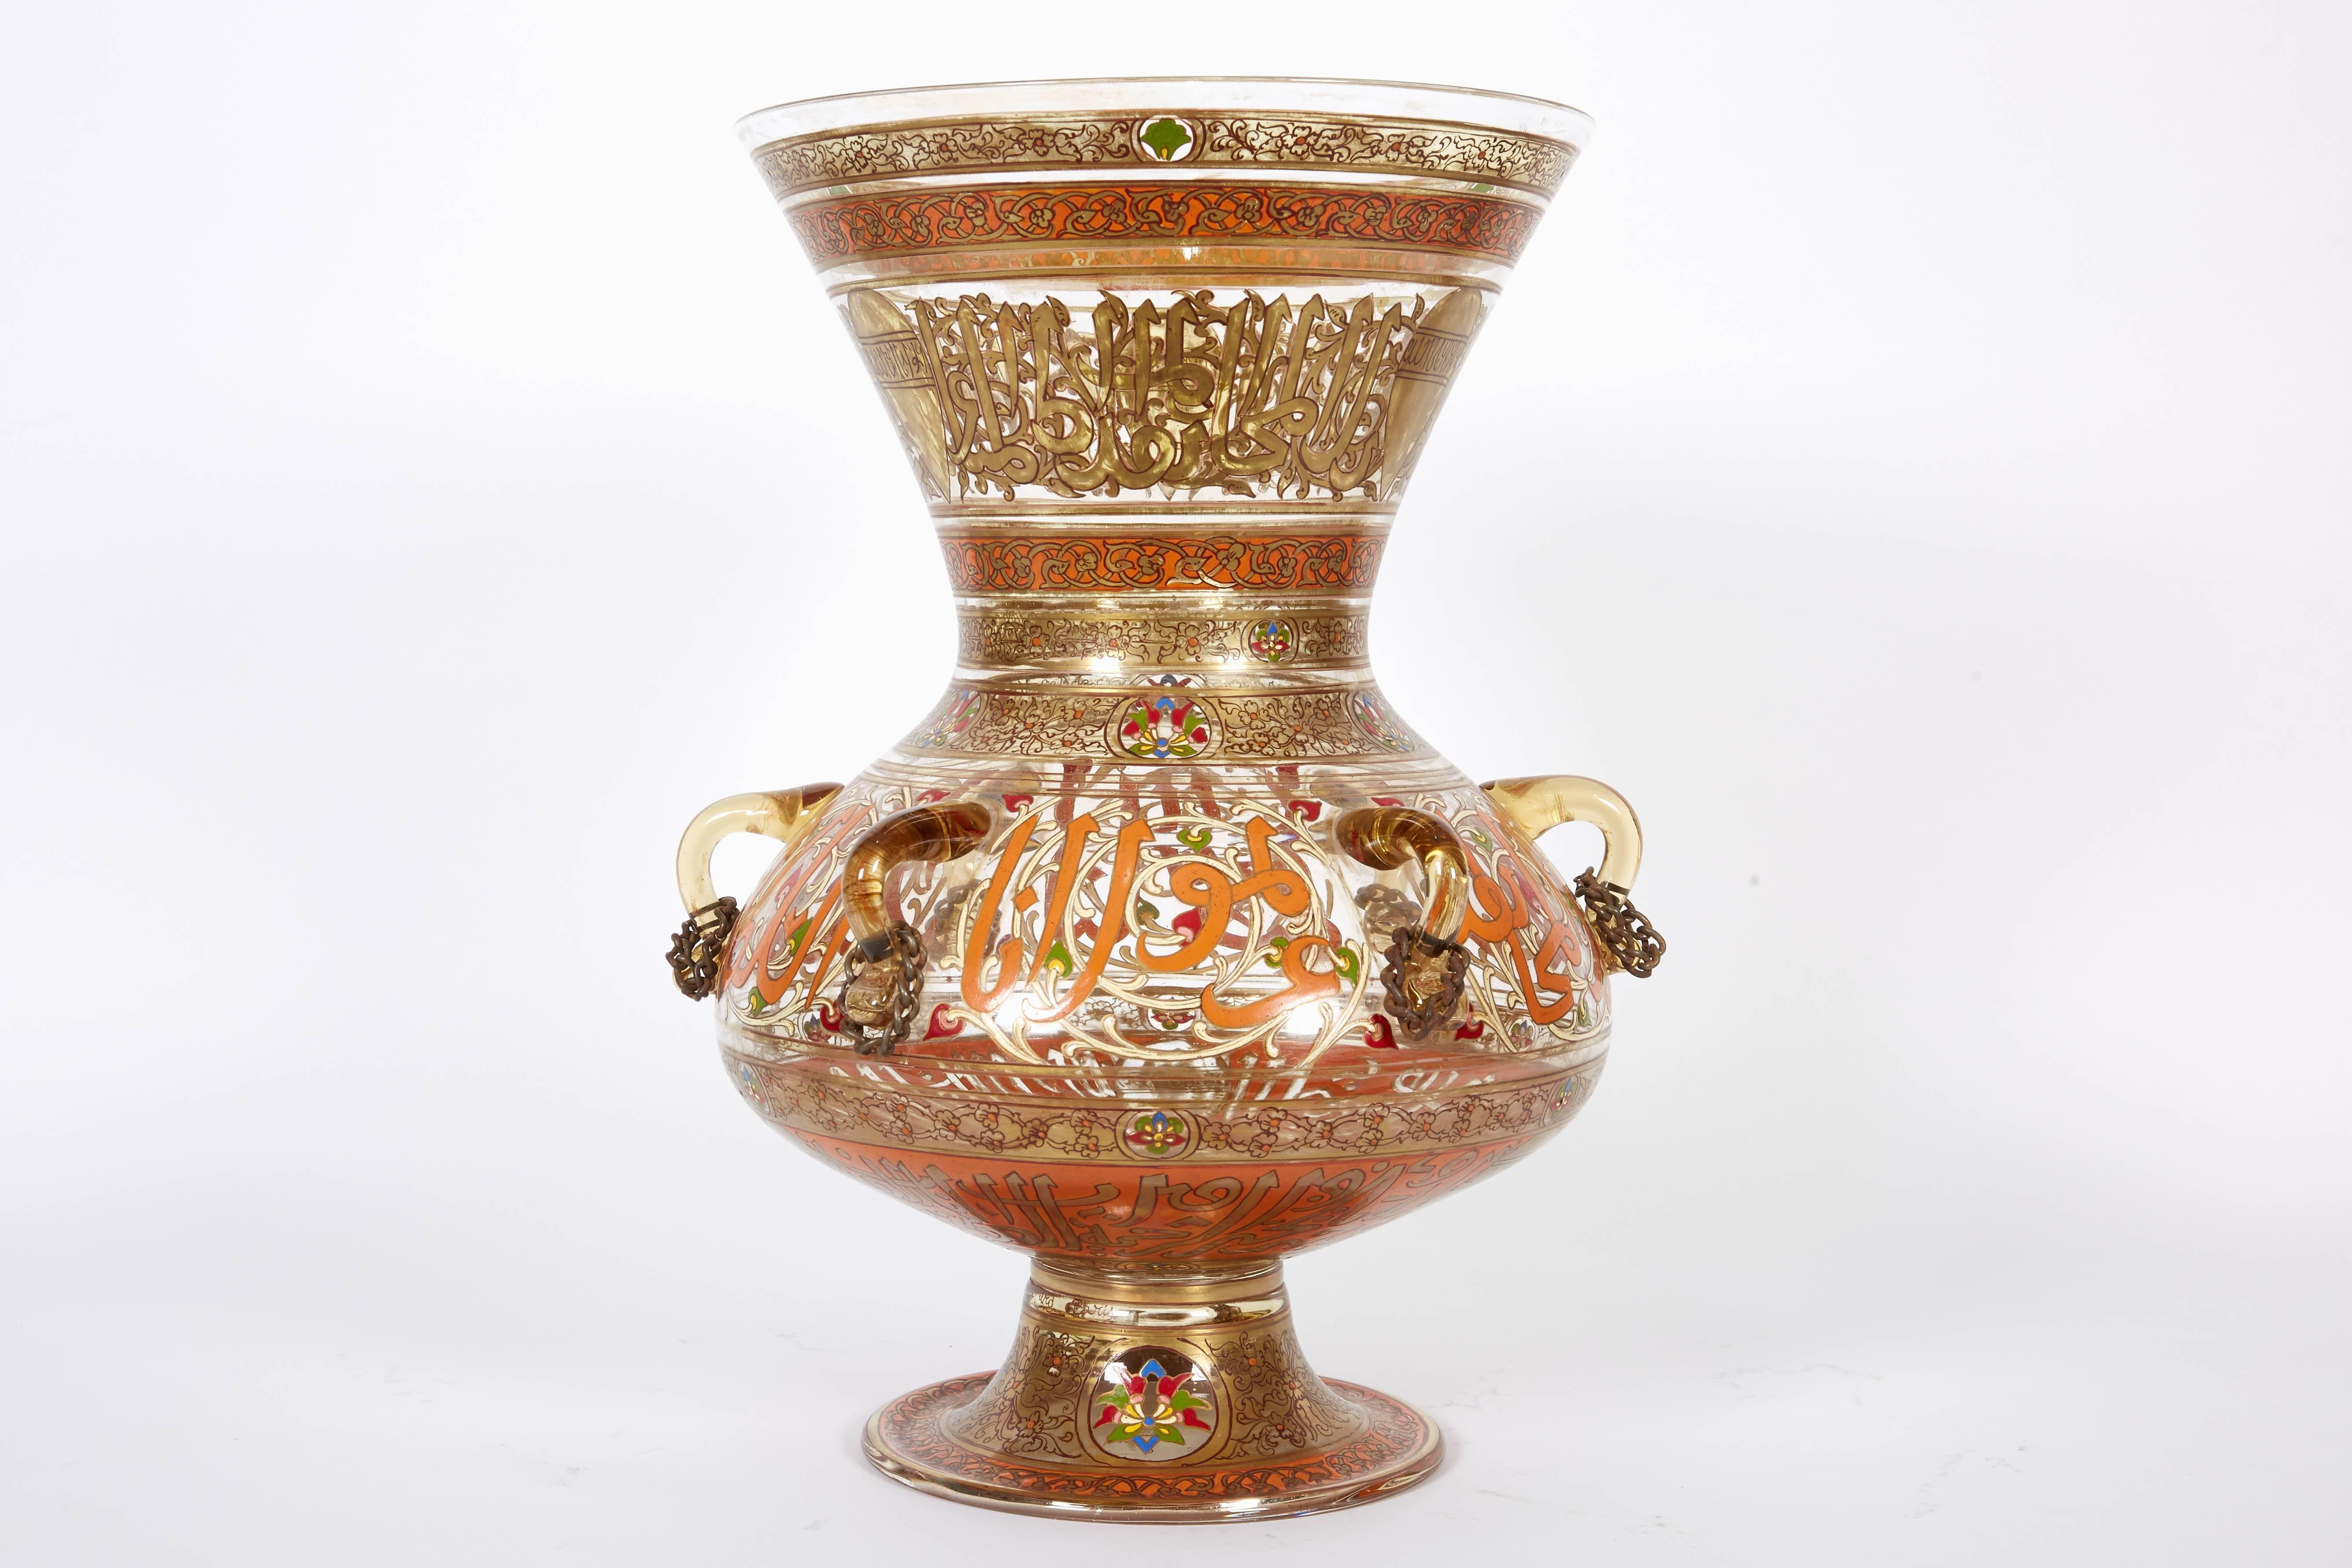 Rare French Enameled Mamluk Revival Glass Mosque Lamp by Philippe Joseph Brocard For Sale 6